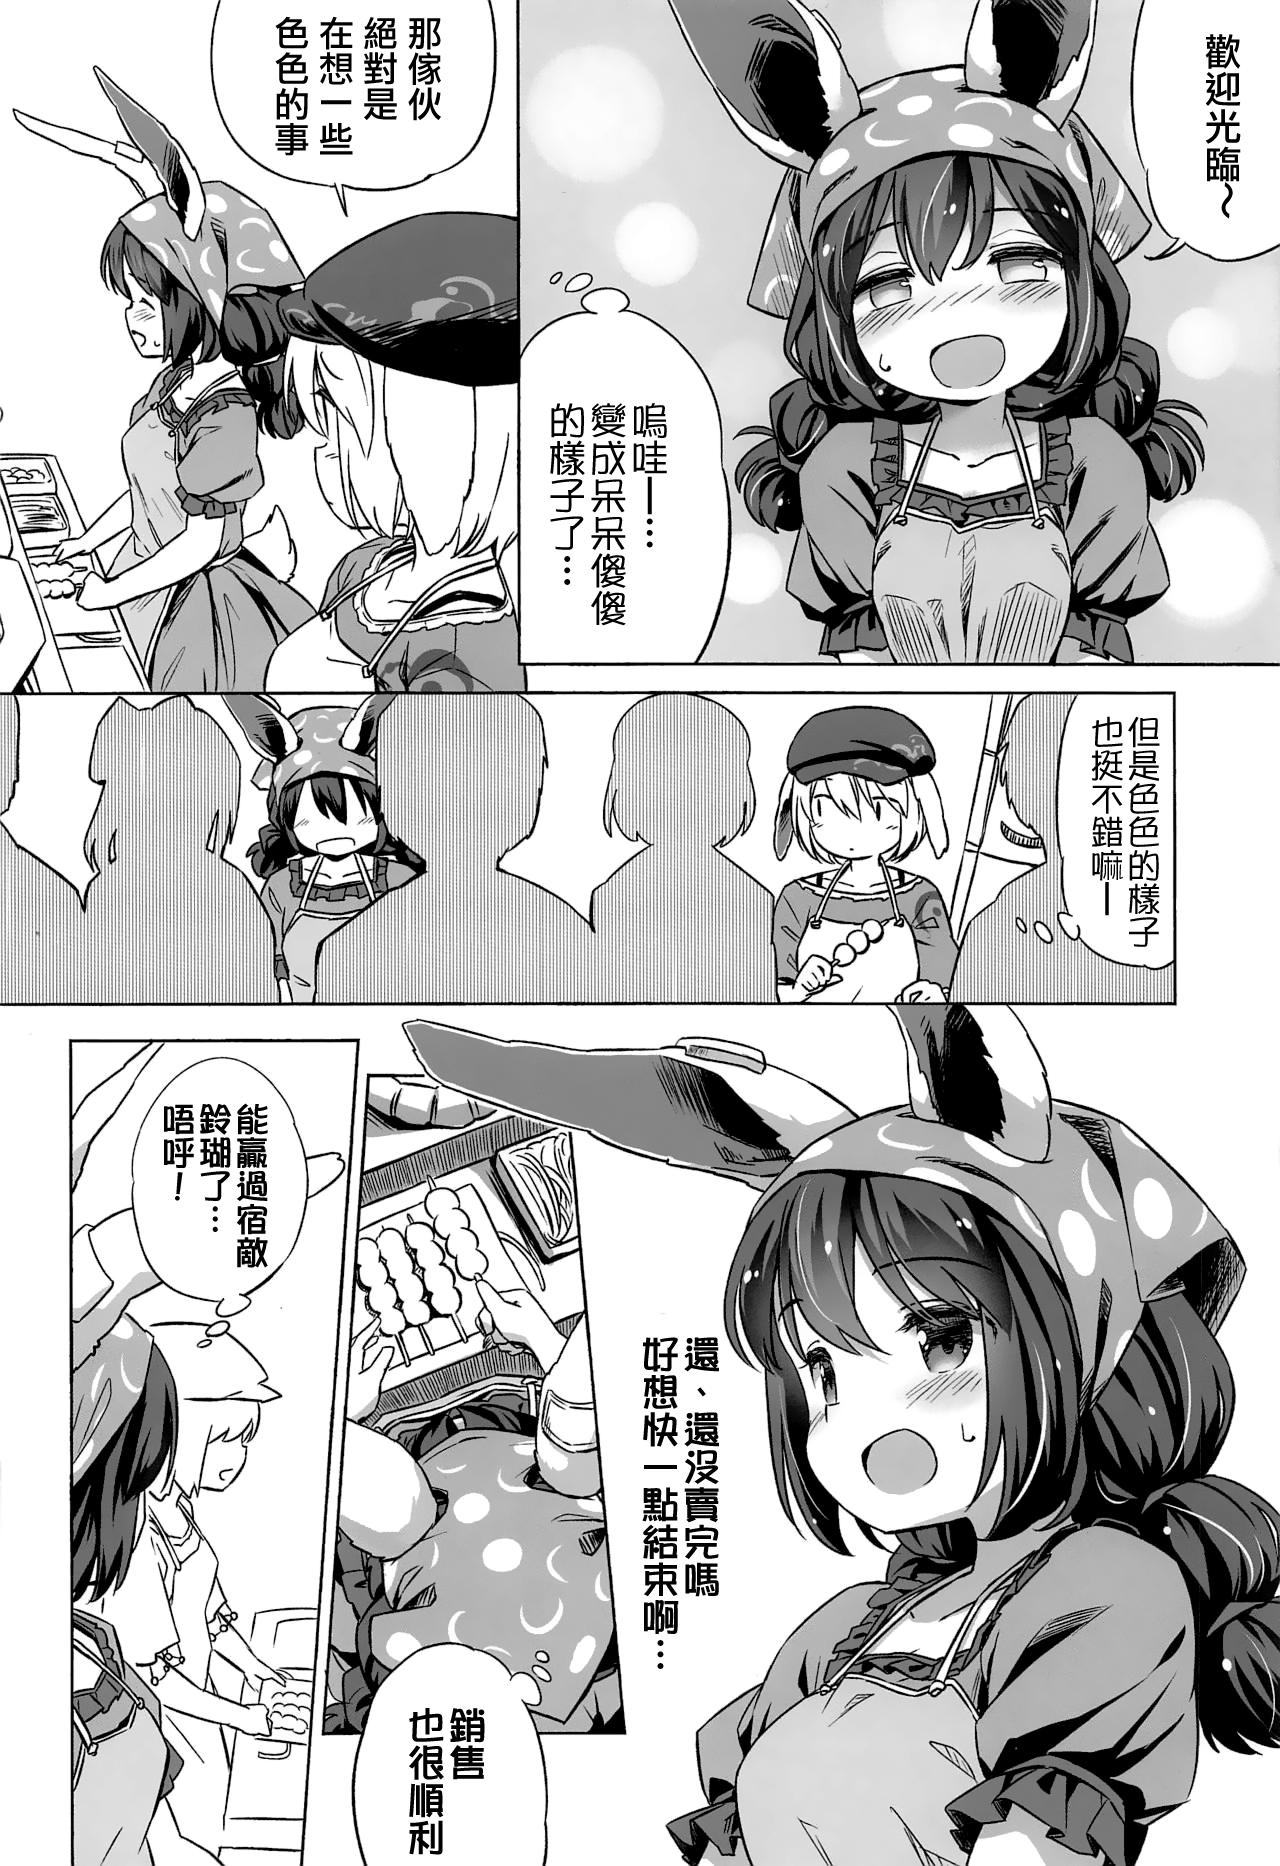 Soloboy Granny Smith Mating - Touhou project Full - Page 9